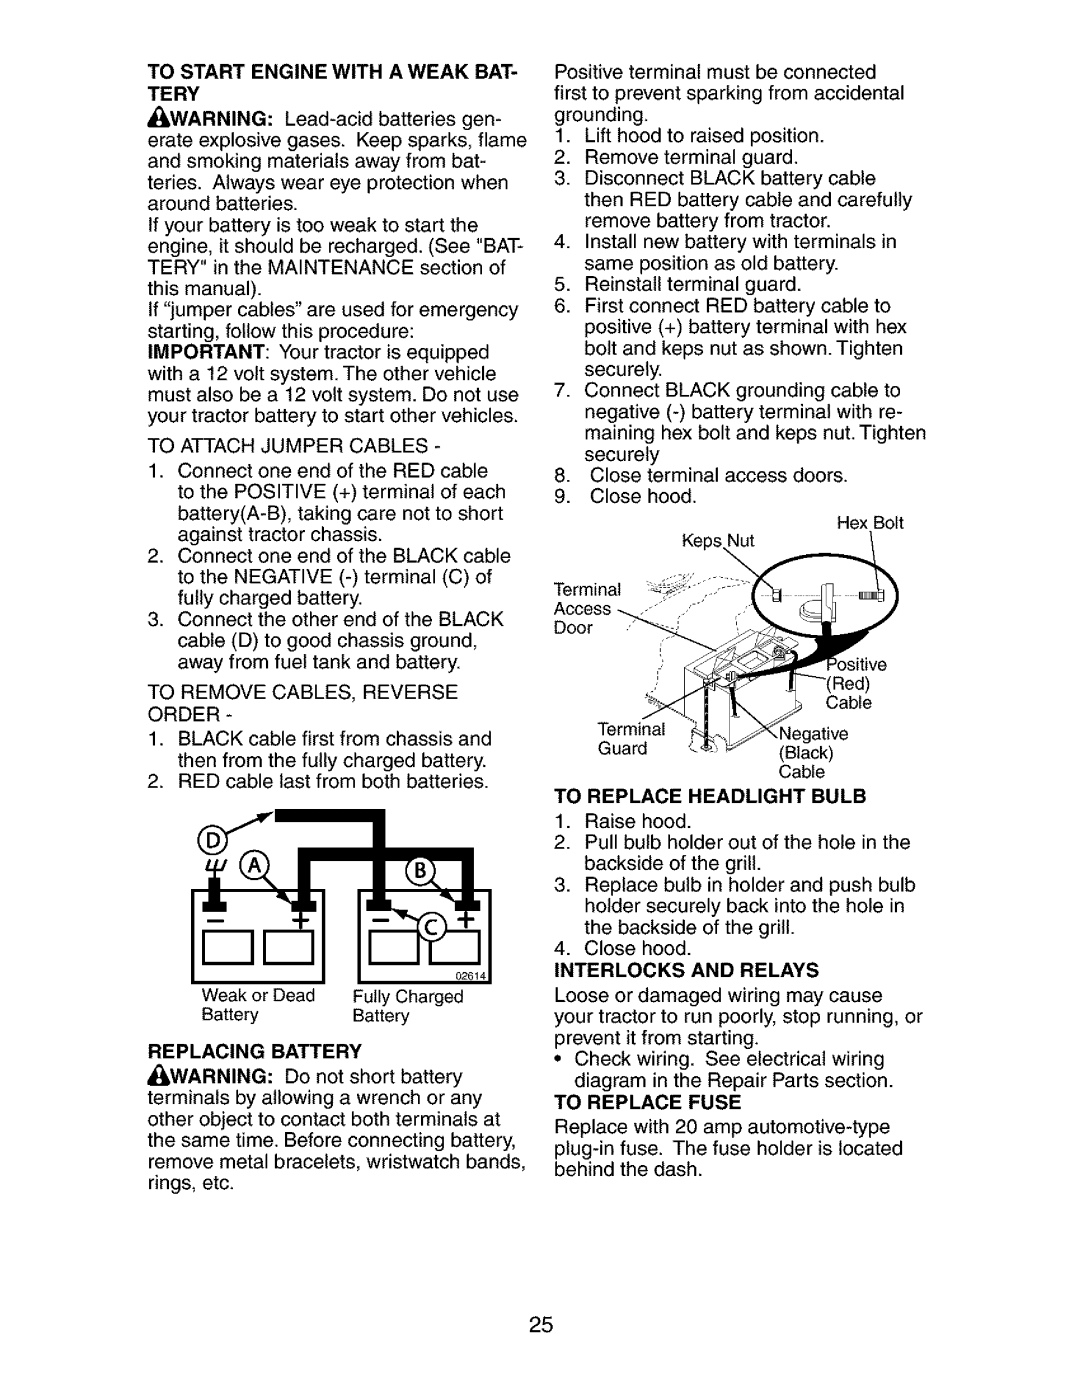 Craftsman 917.27377 manual To Start Engine With A Weak Bat- Te Ry, Replacing Battery 